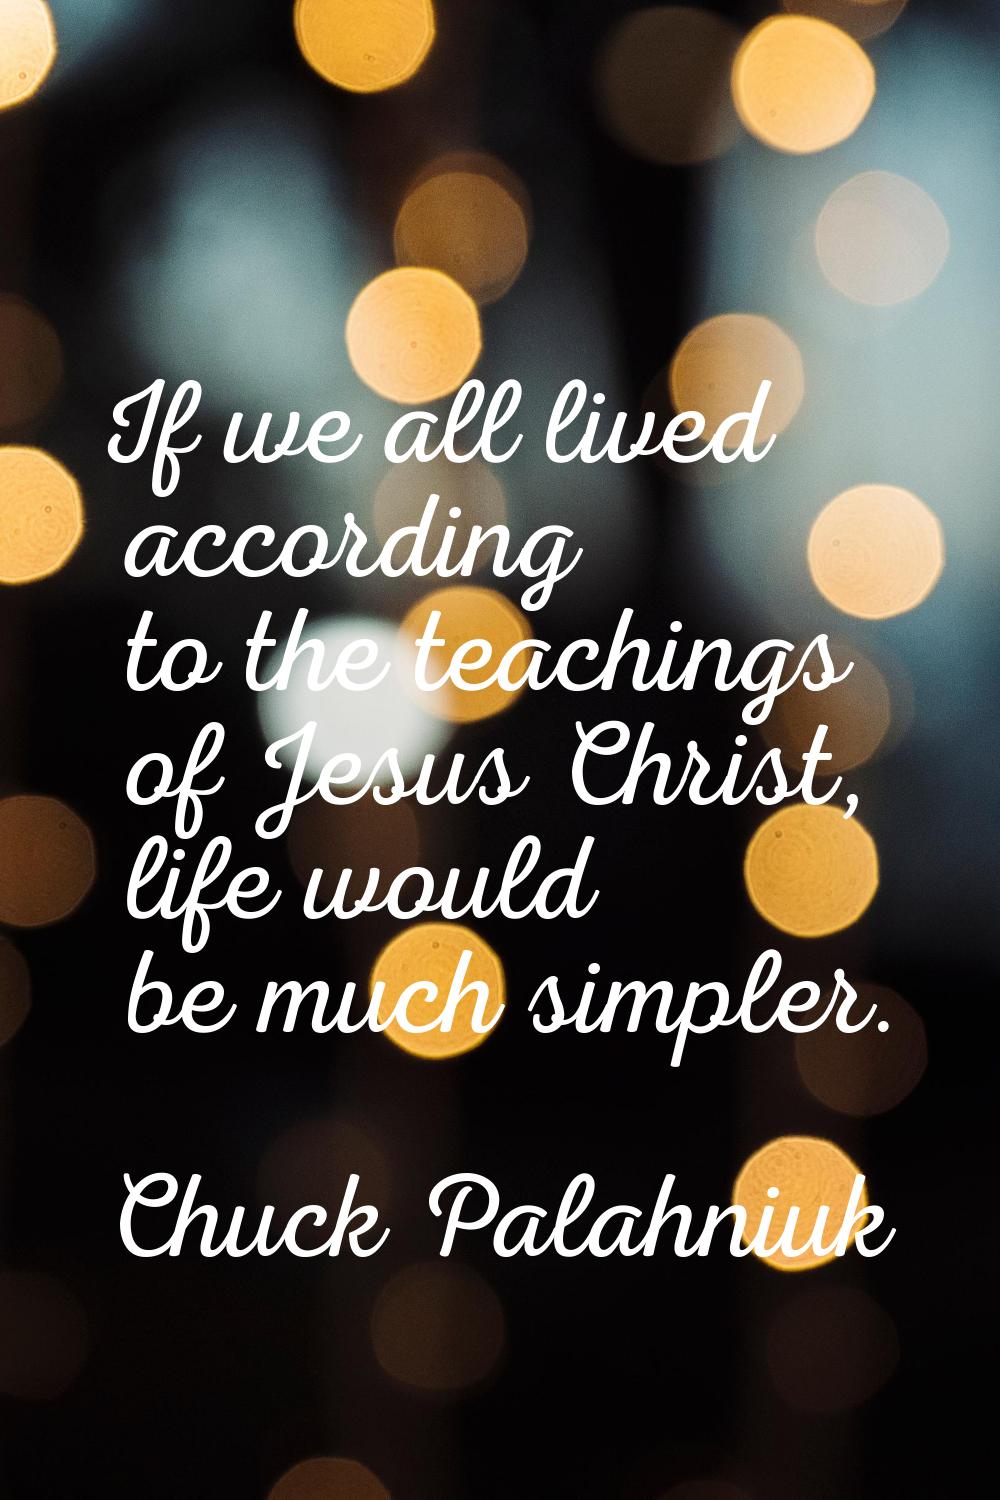 If we all lived according to the teachings of Jesus Christ, life would be much simpler.